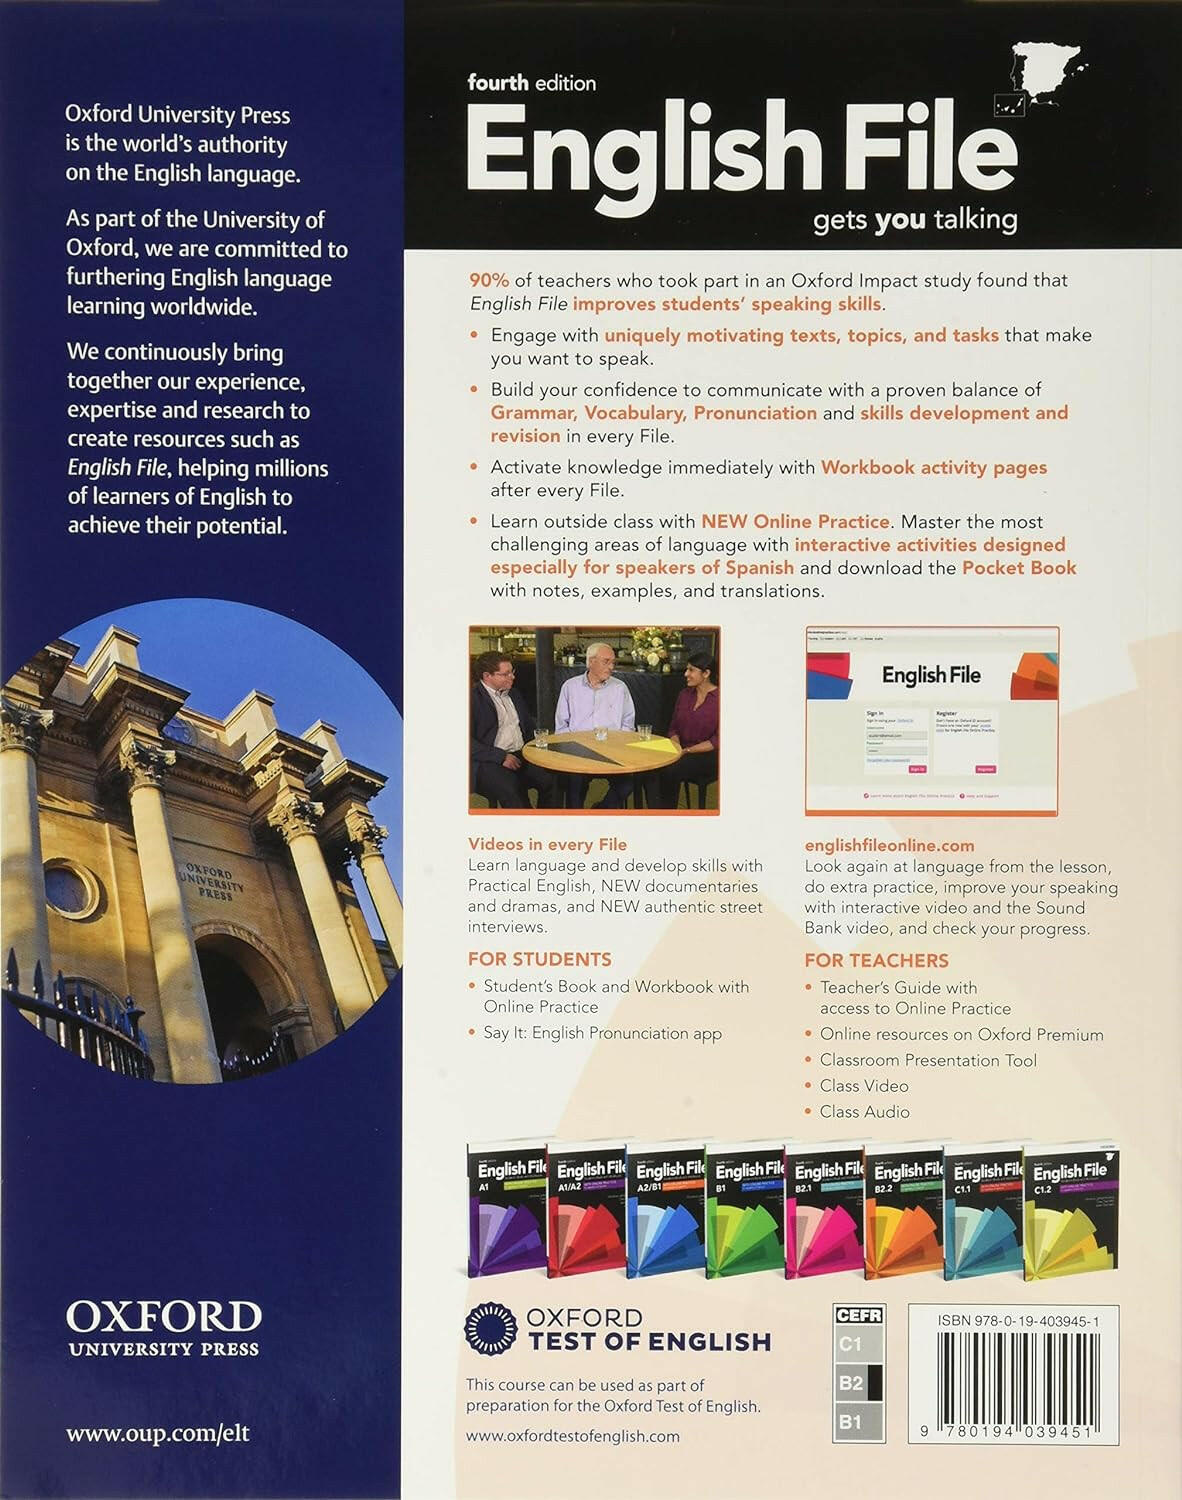 English File 4th Edition B2.2. - Beige and Blue markT